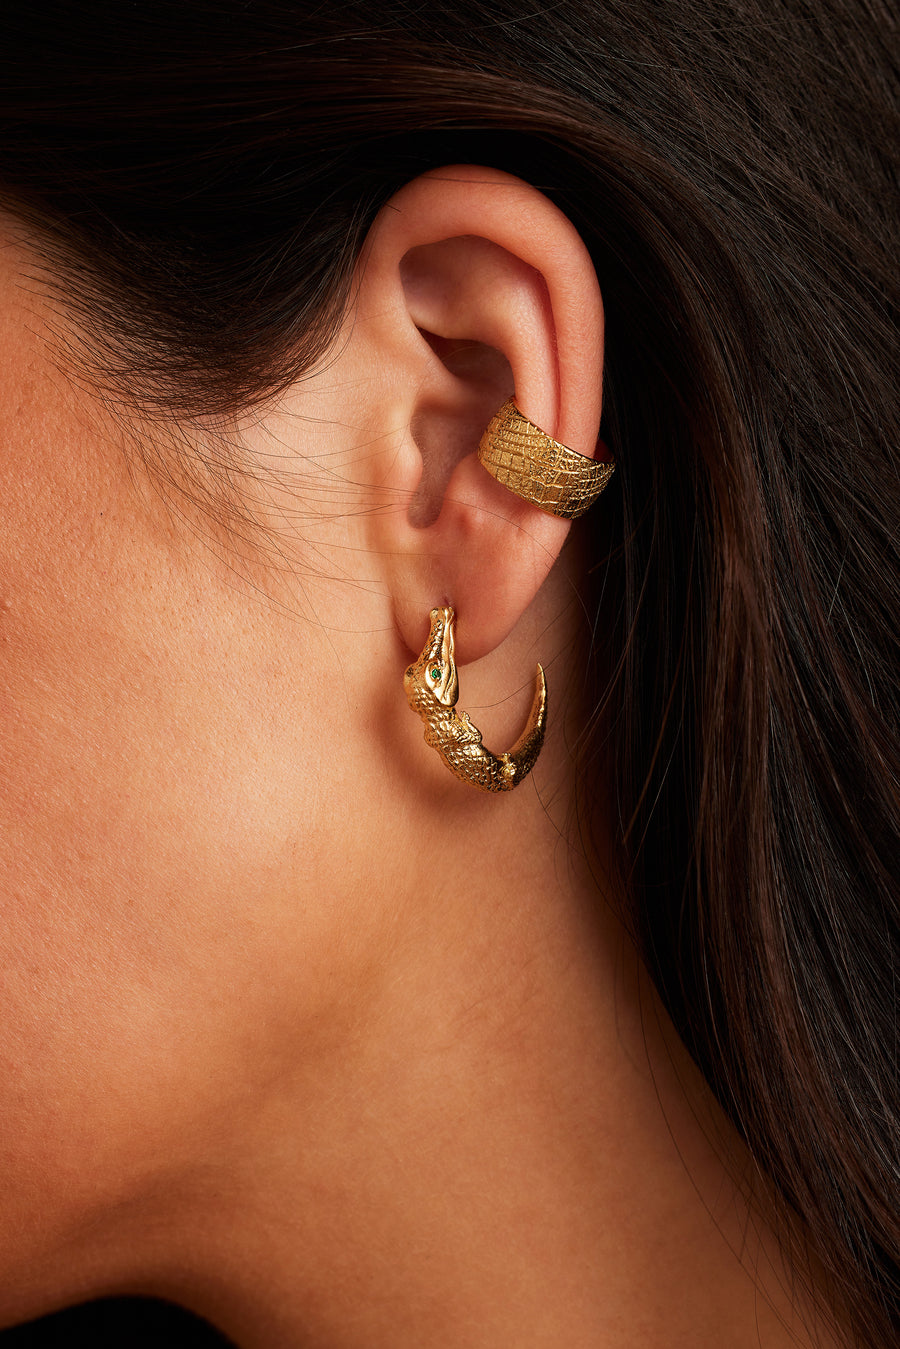 Woman wearing the Desert Darling Ear Cuff in gold paired with the Zapata Eye Croc Earrings